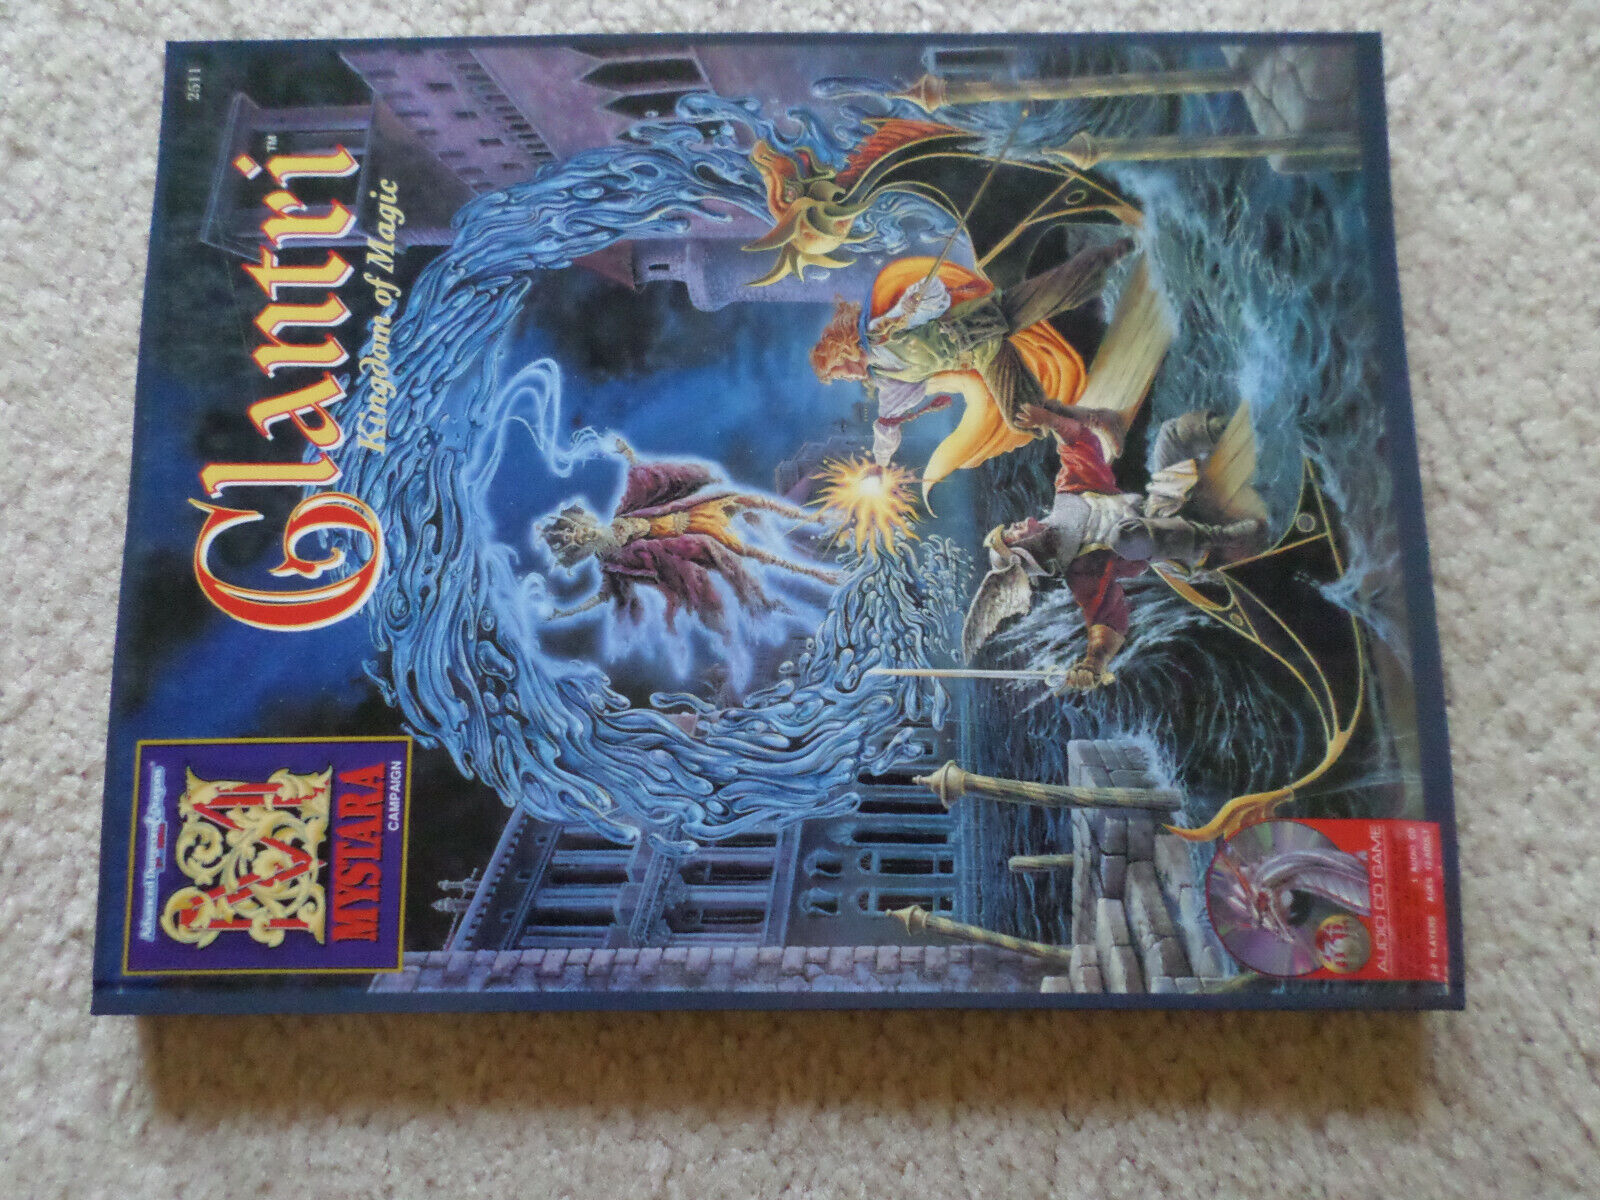 Glantri  Kingdom Of Magic    Dungeons & Dragons   No Cd Otherwise Complete